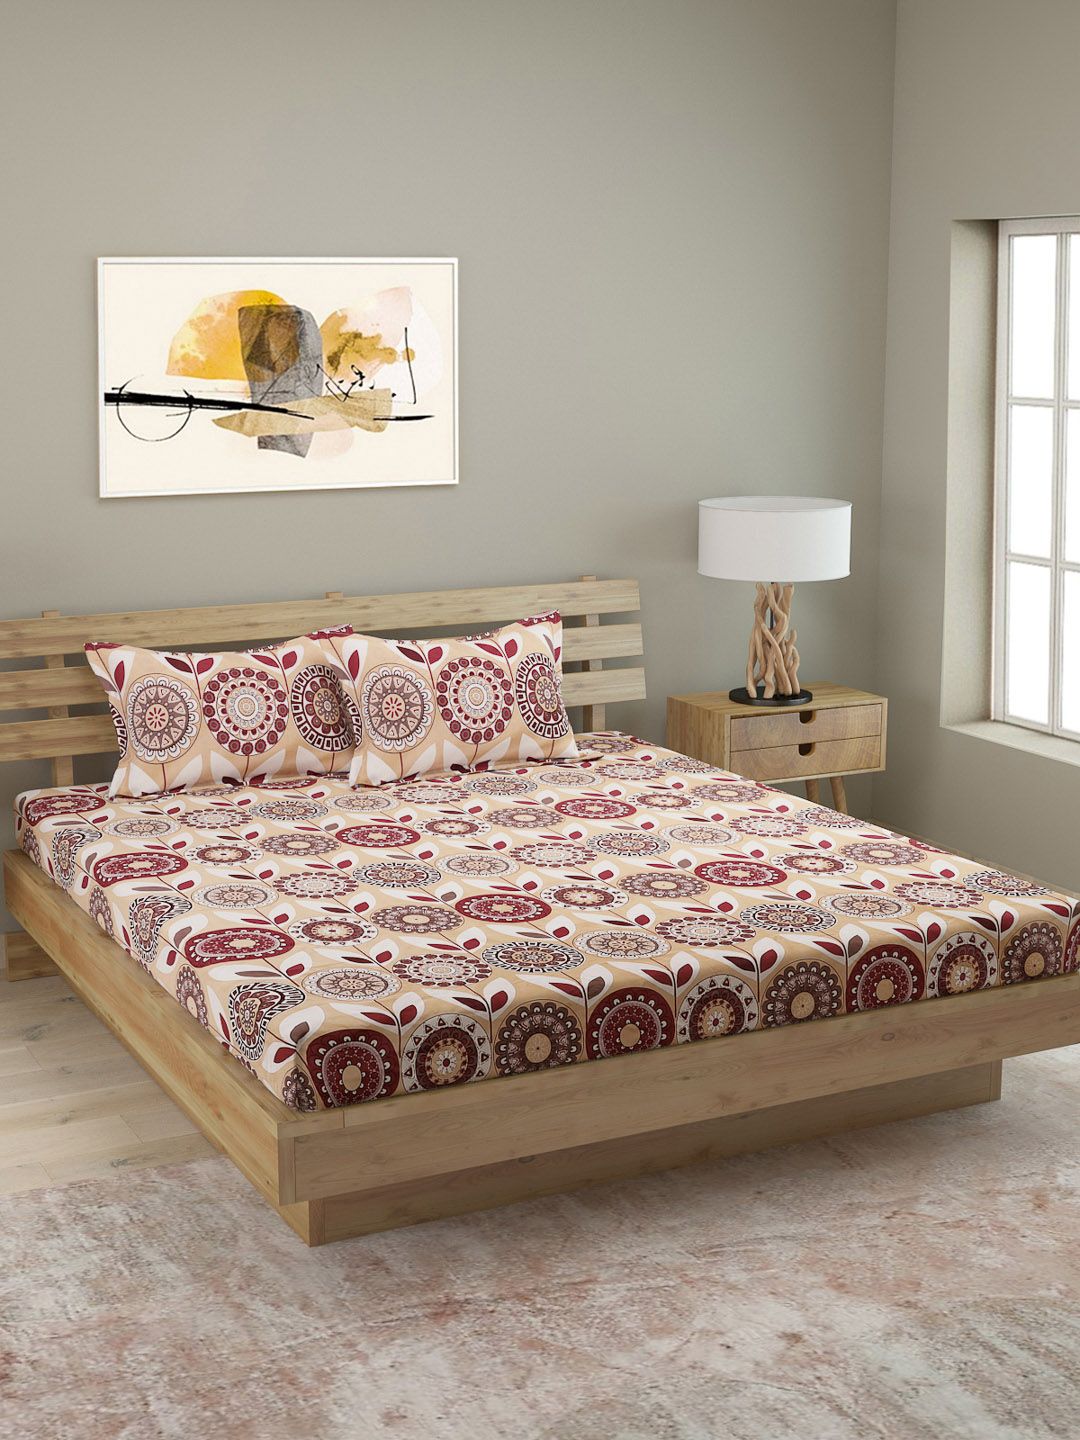 ROMEE Peach-Coloured & Maroon Floral 250 TC Cotton 1 King Bedsheet with 2 Pillow Covers Price in India